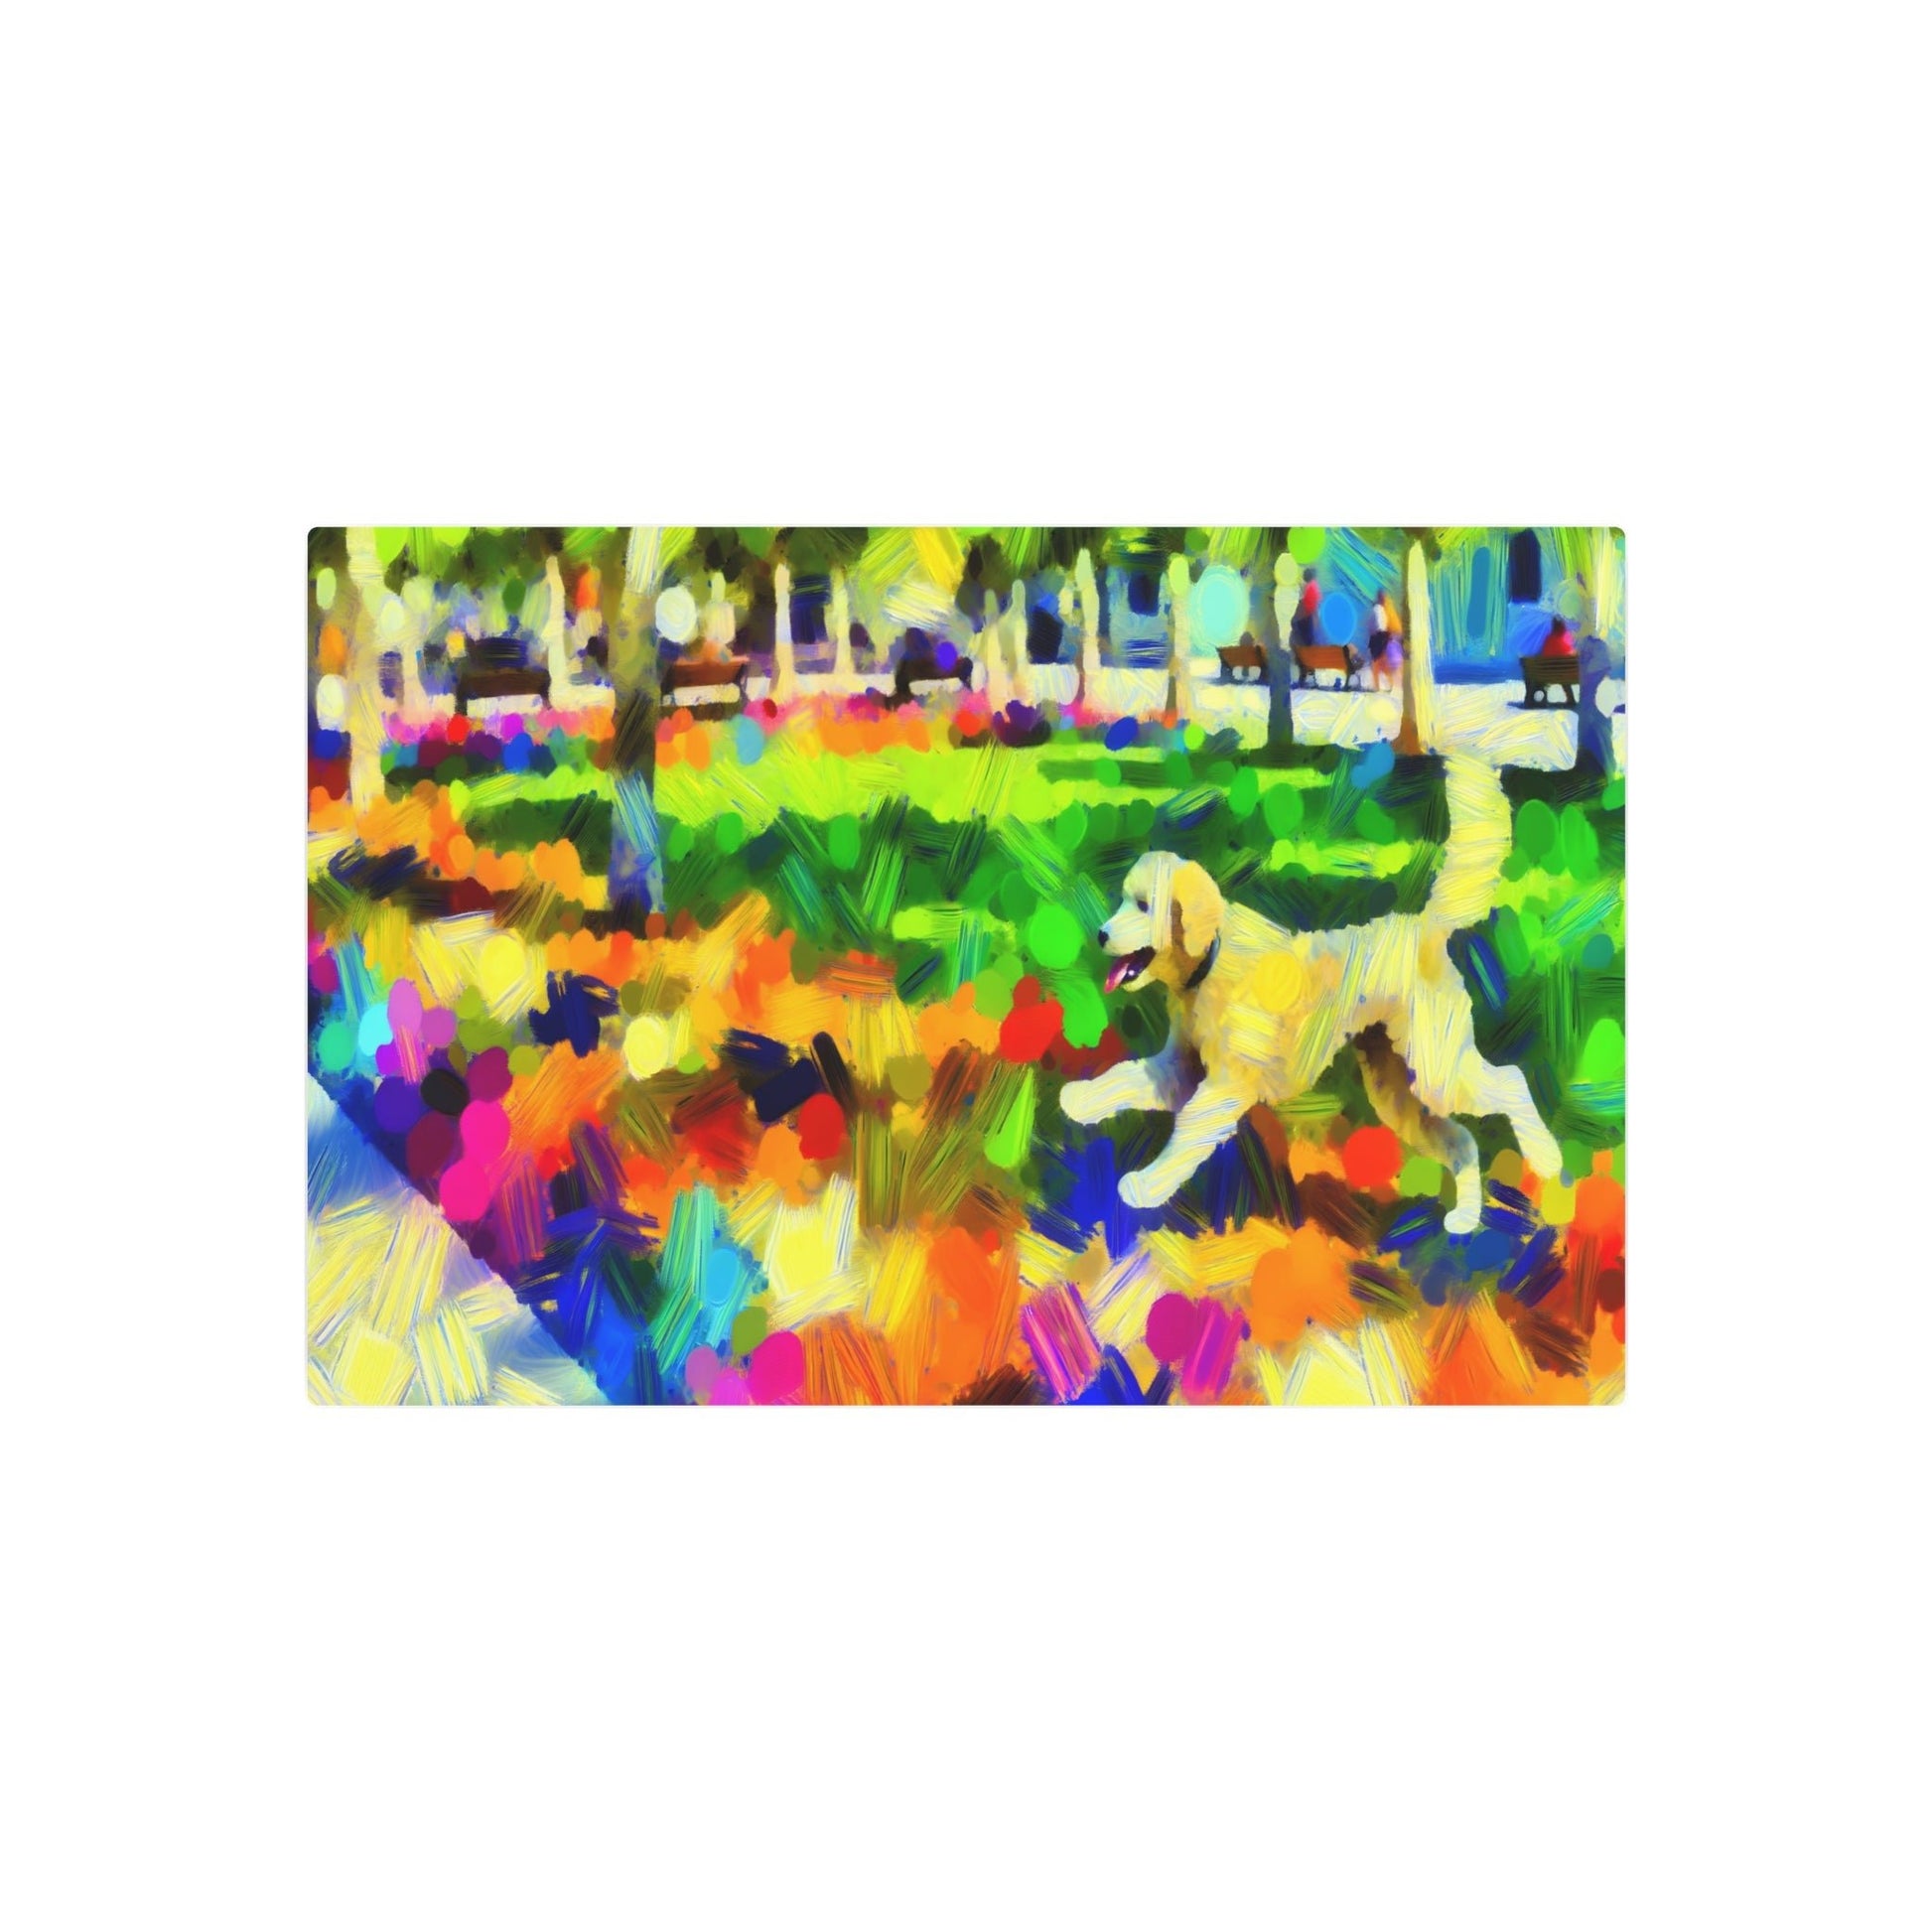 Metal Poster Art | "Impressionistic Western Art Style - Vibrant Colorful Brushstrokes of a Dog Playing in Sunny Park" - Metal Poster Art 30″ x 20″ (Horizontal) 0.12''